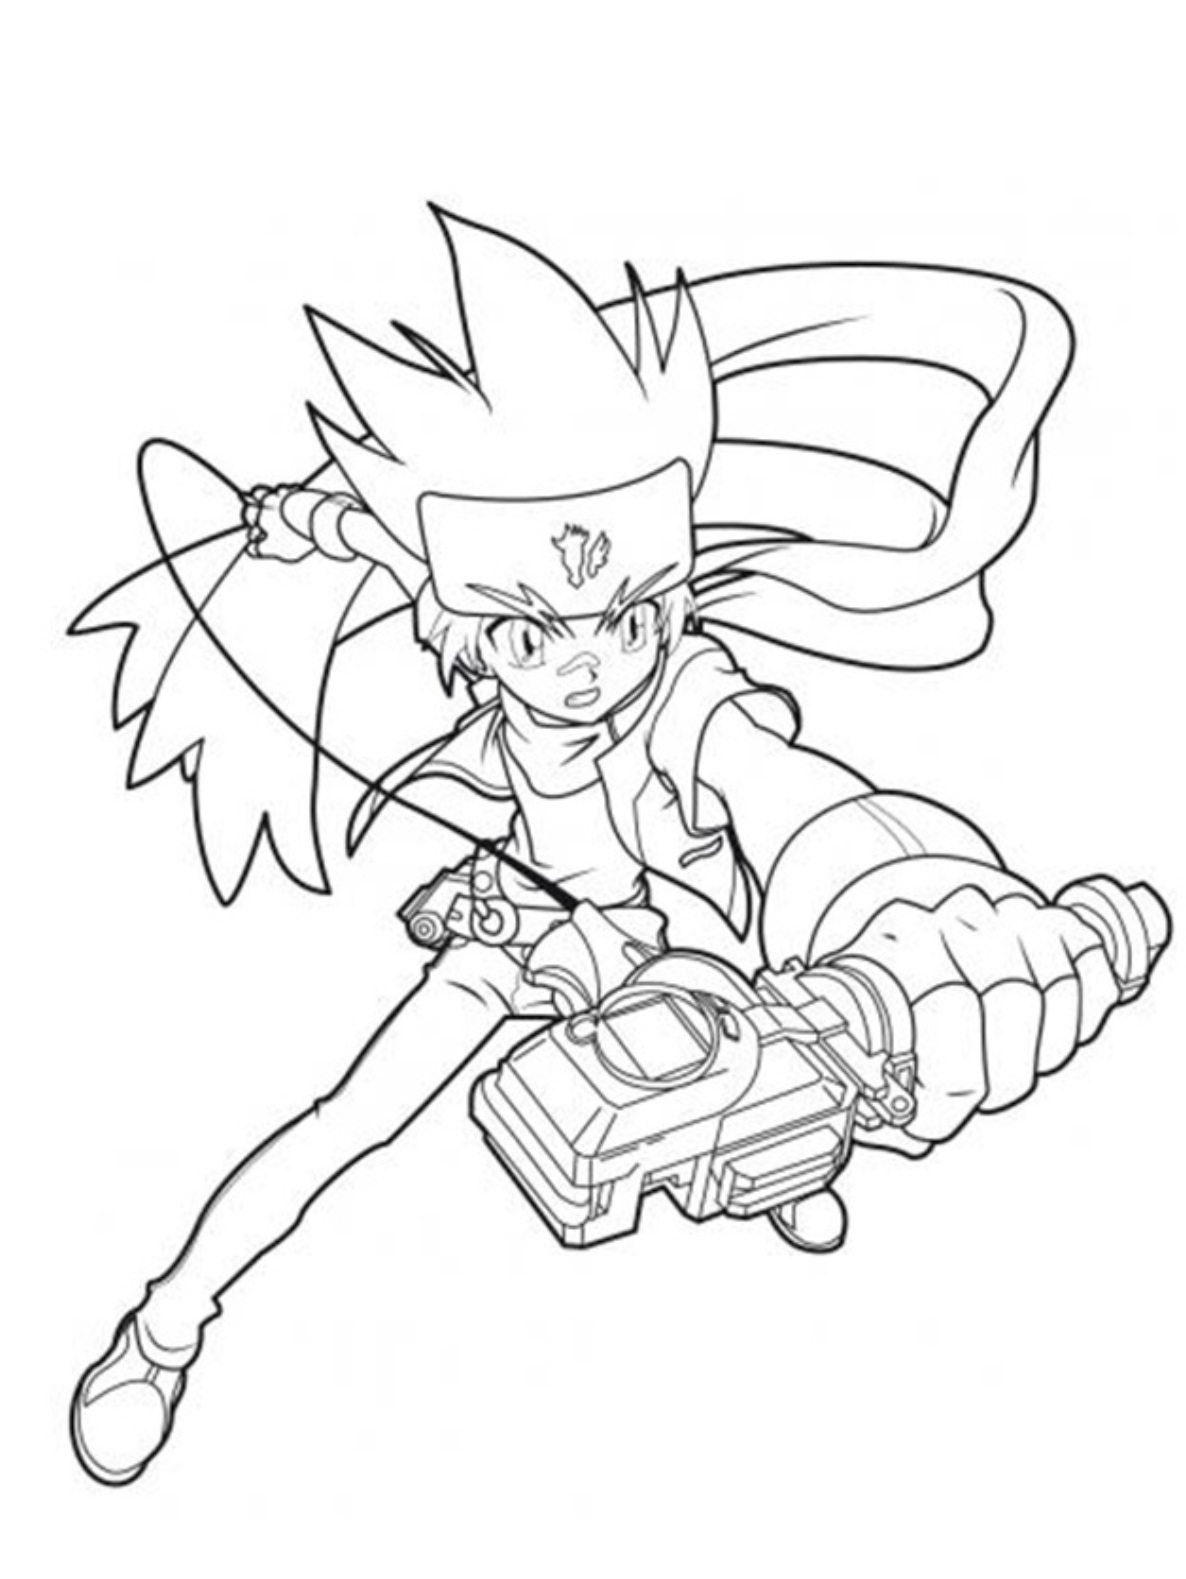 368 Cute Printable Beyblade Coloring Pages with Animal character